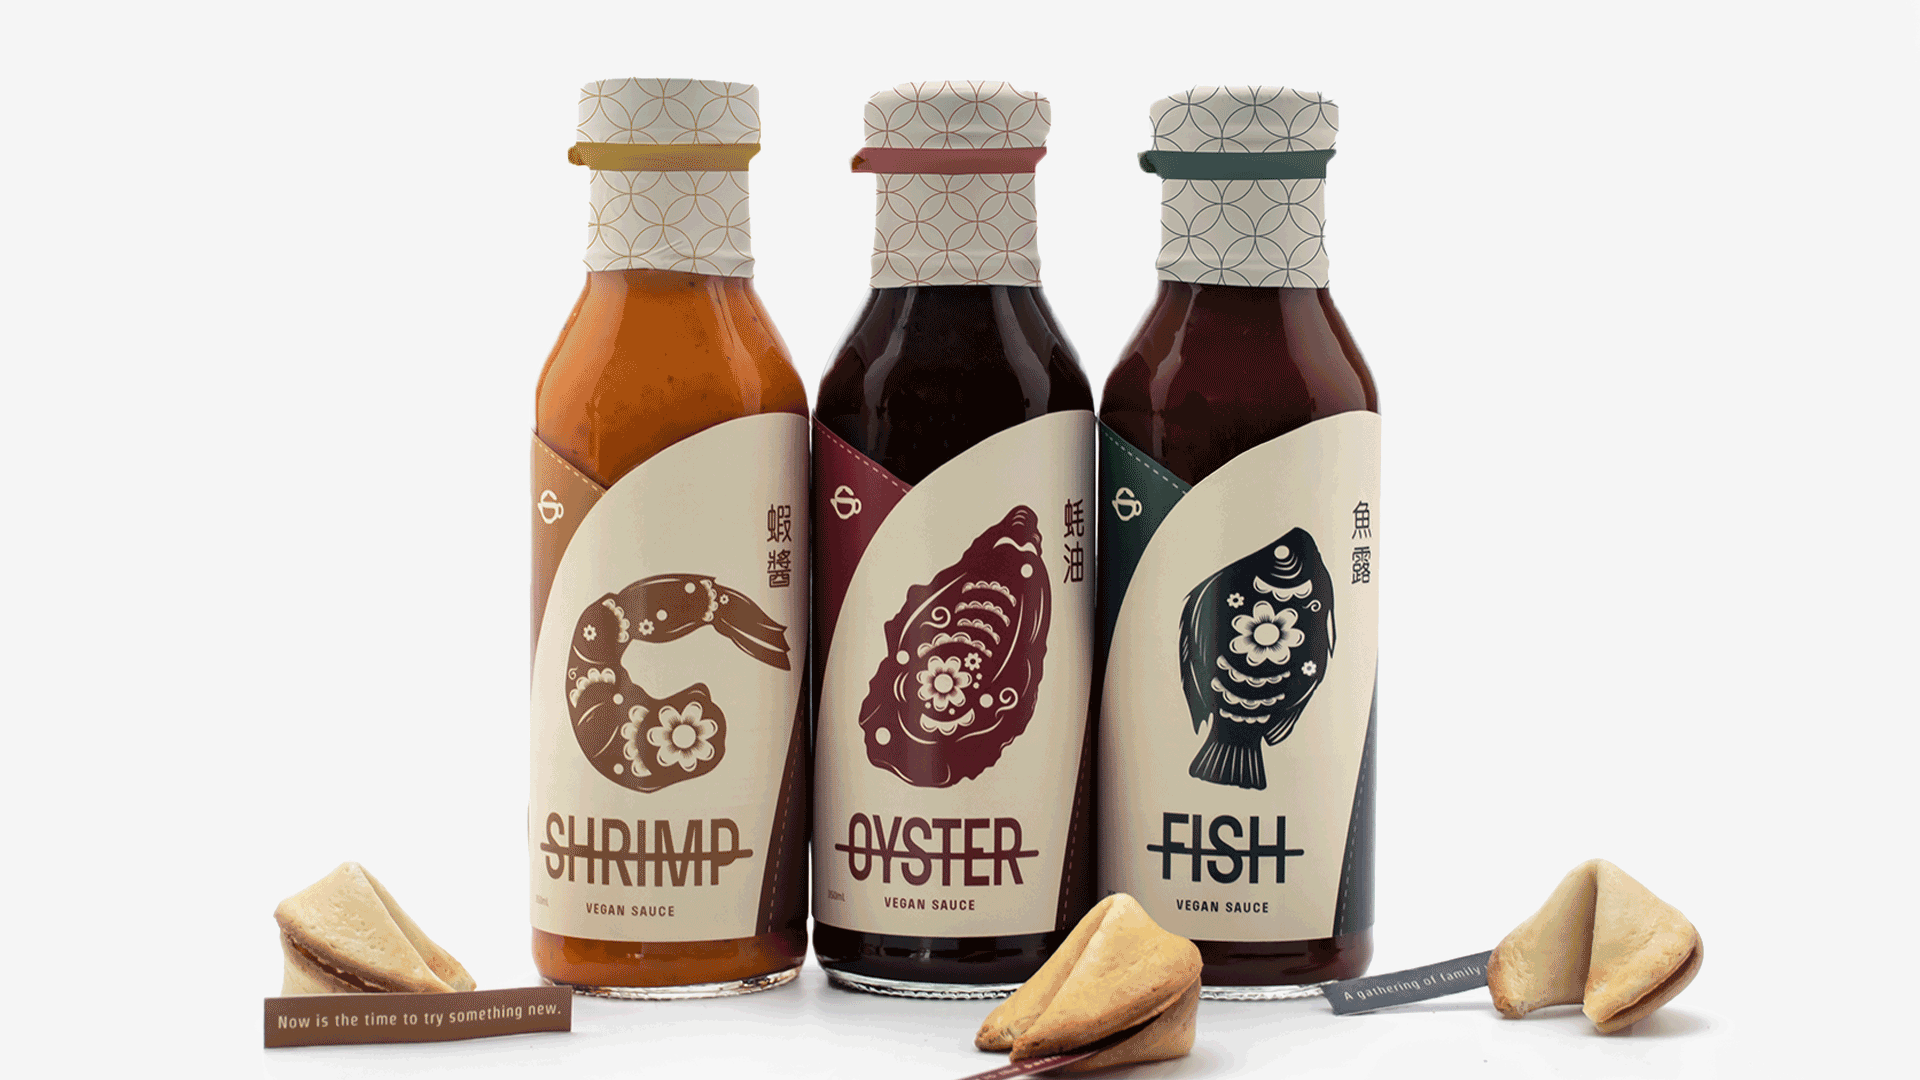 A vegan sauce packaging design series based on a Chinese fusion restaurant brand identity.